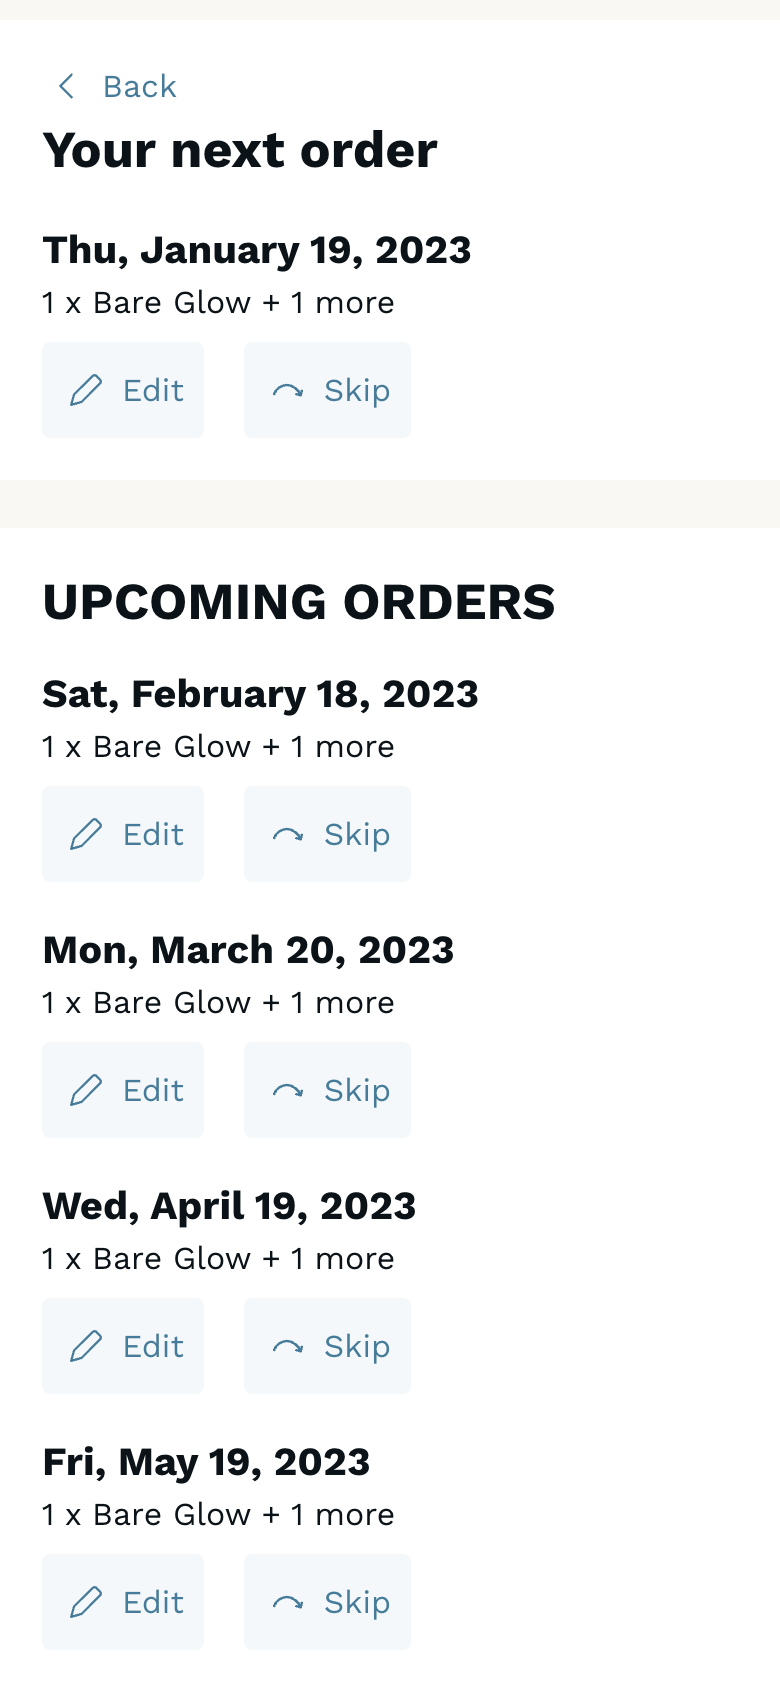 order management, upcoming and past orders